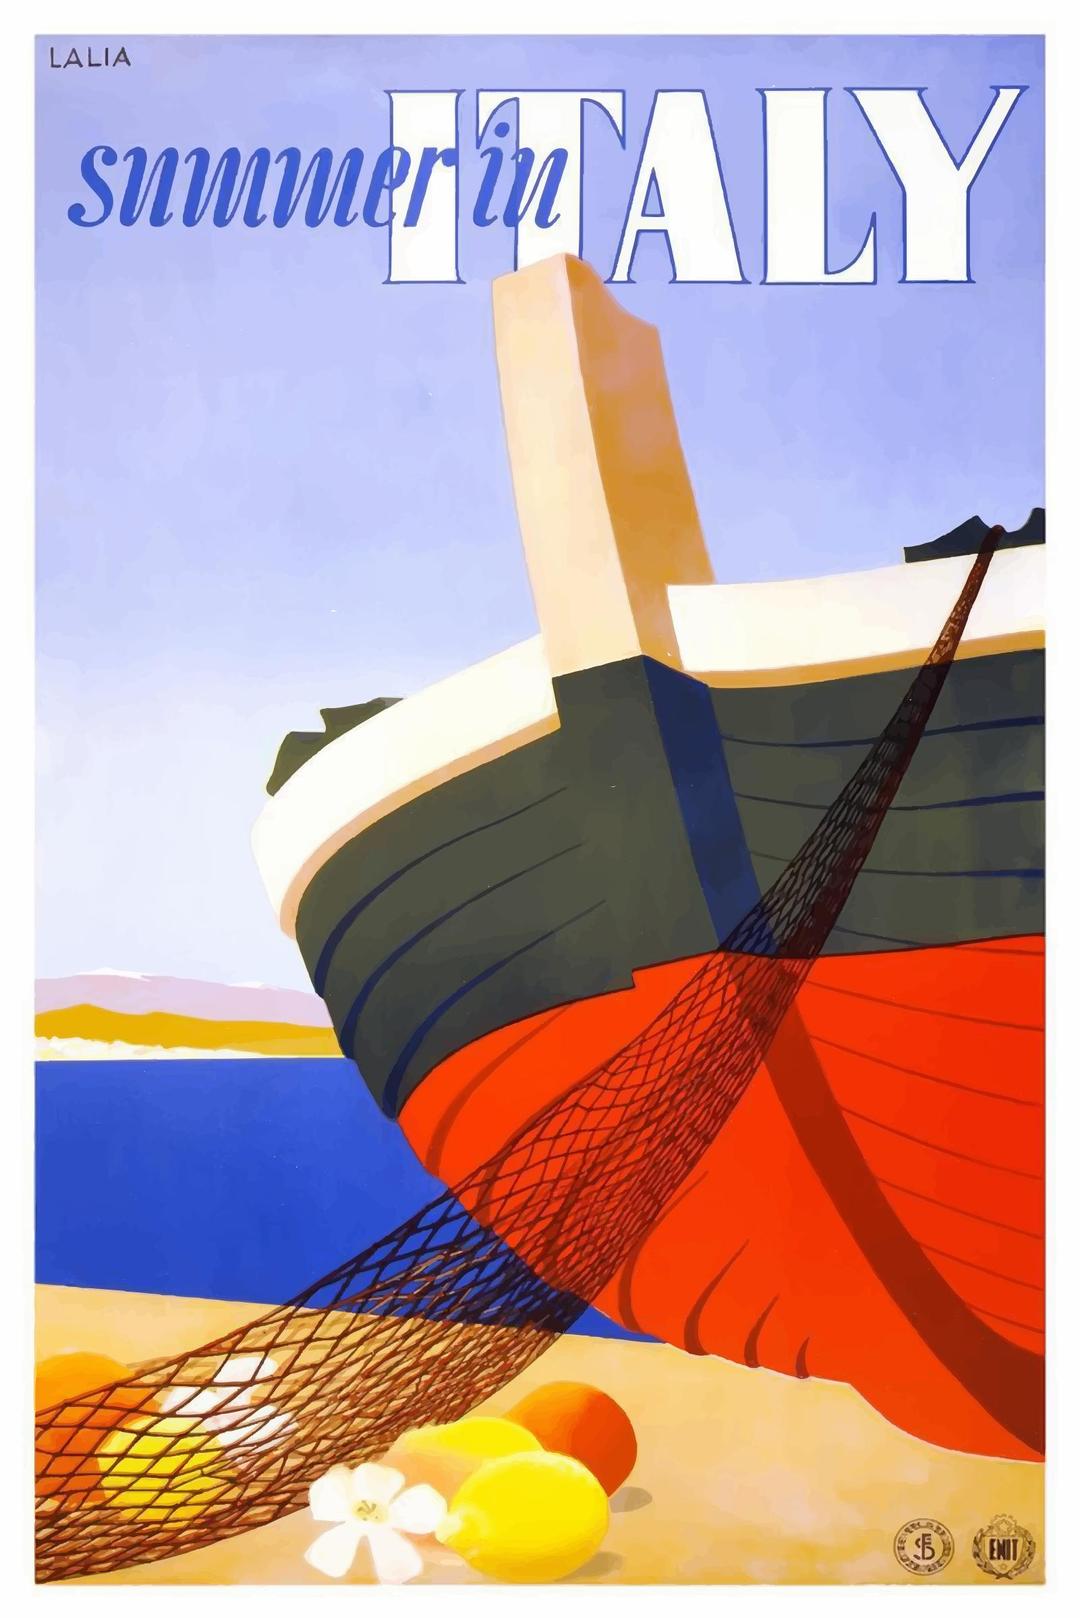 Vintage Travel Poster Italy png transparent